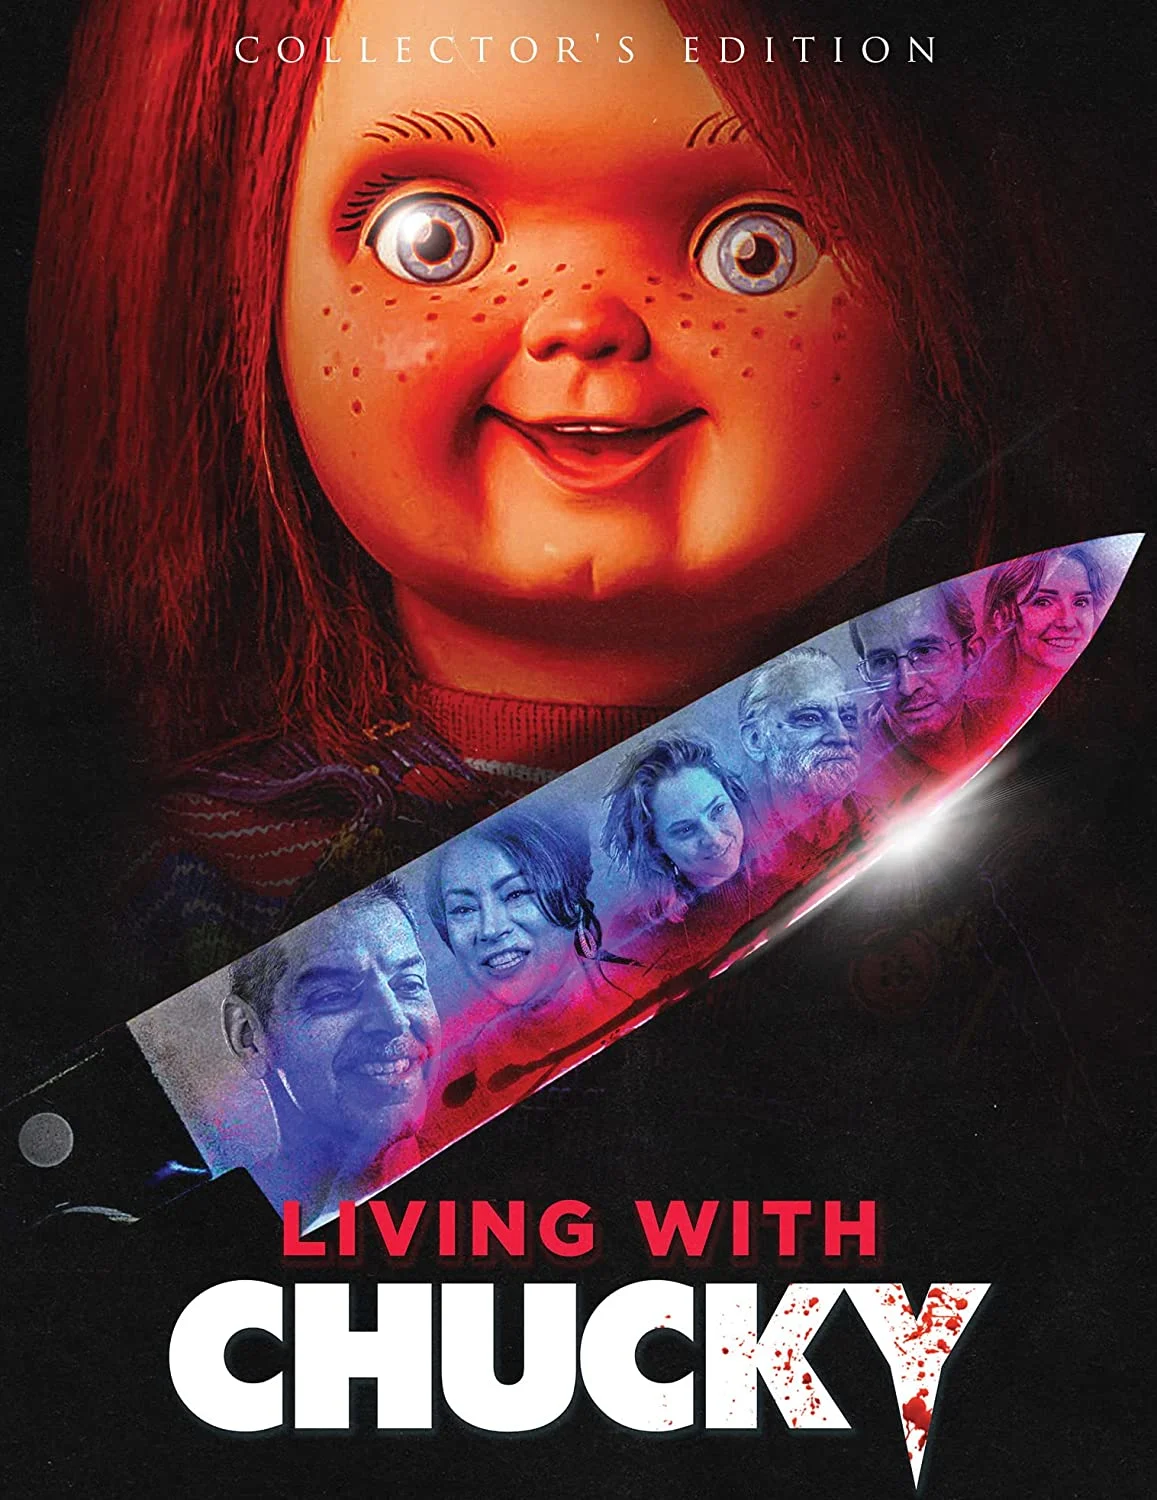 Living With Chucky – Collectors Edition (Blu-ray)